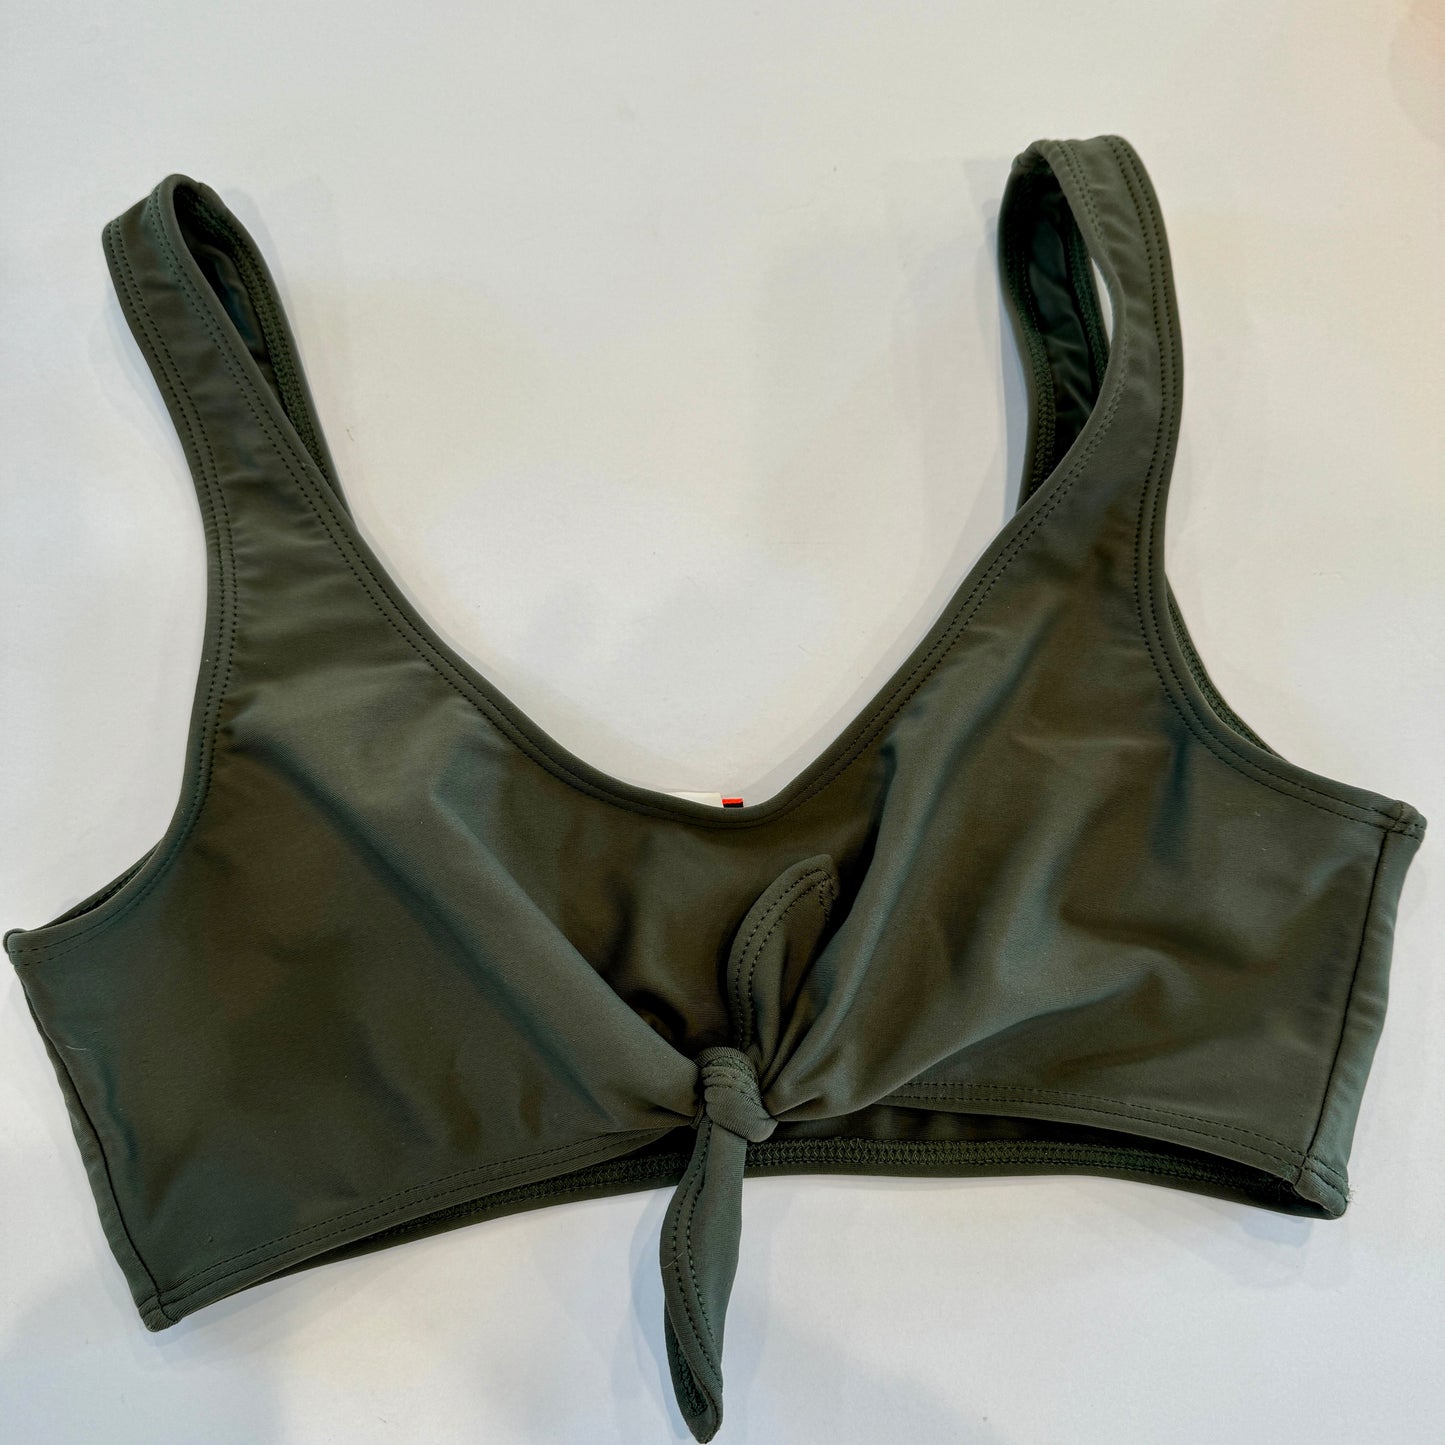 Lolli X Free People Collab Swim Top Olive Army Green Tie Front Bikini Like New Pre-Owned